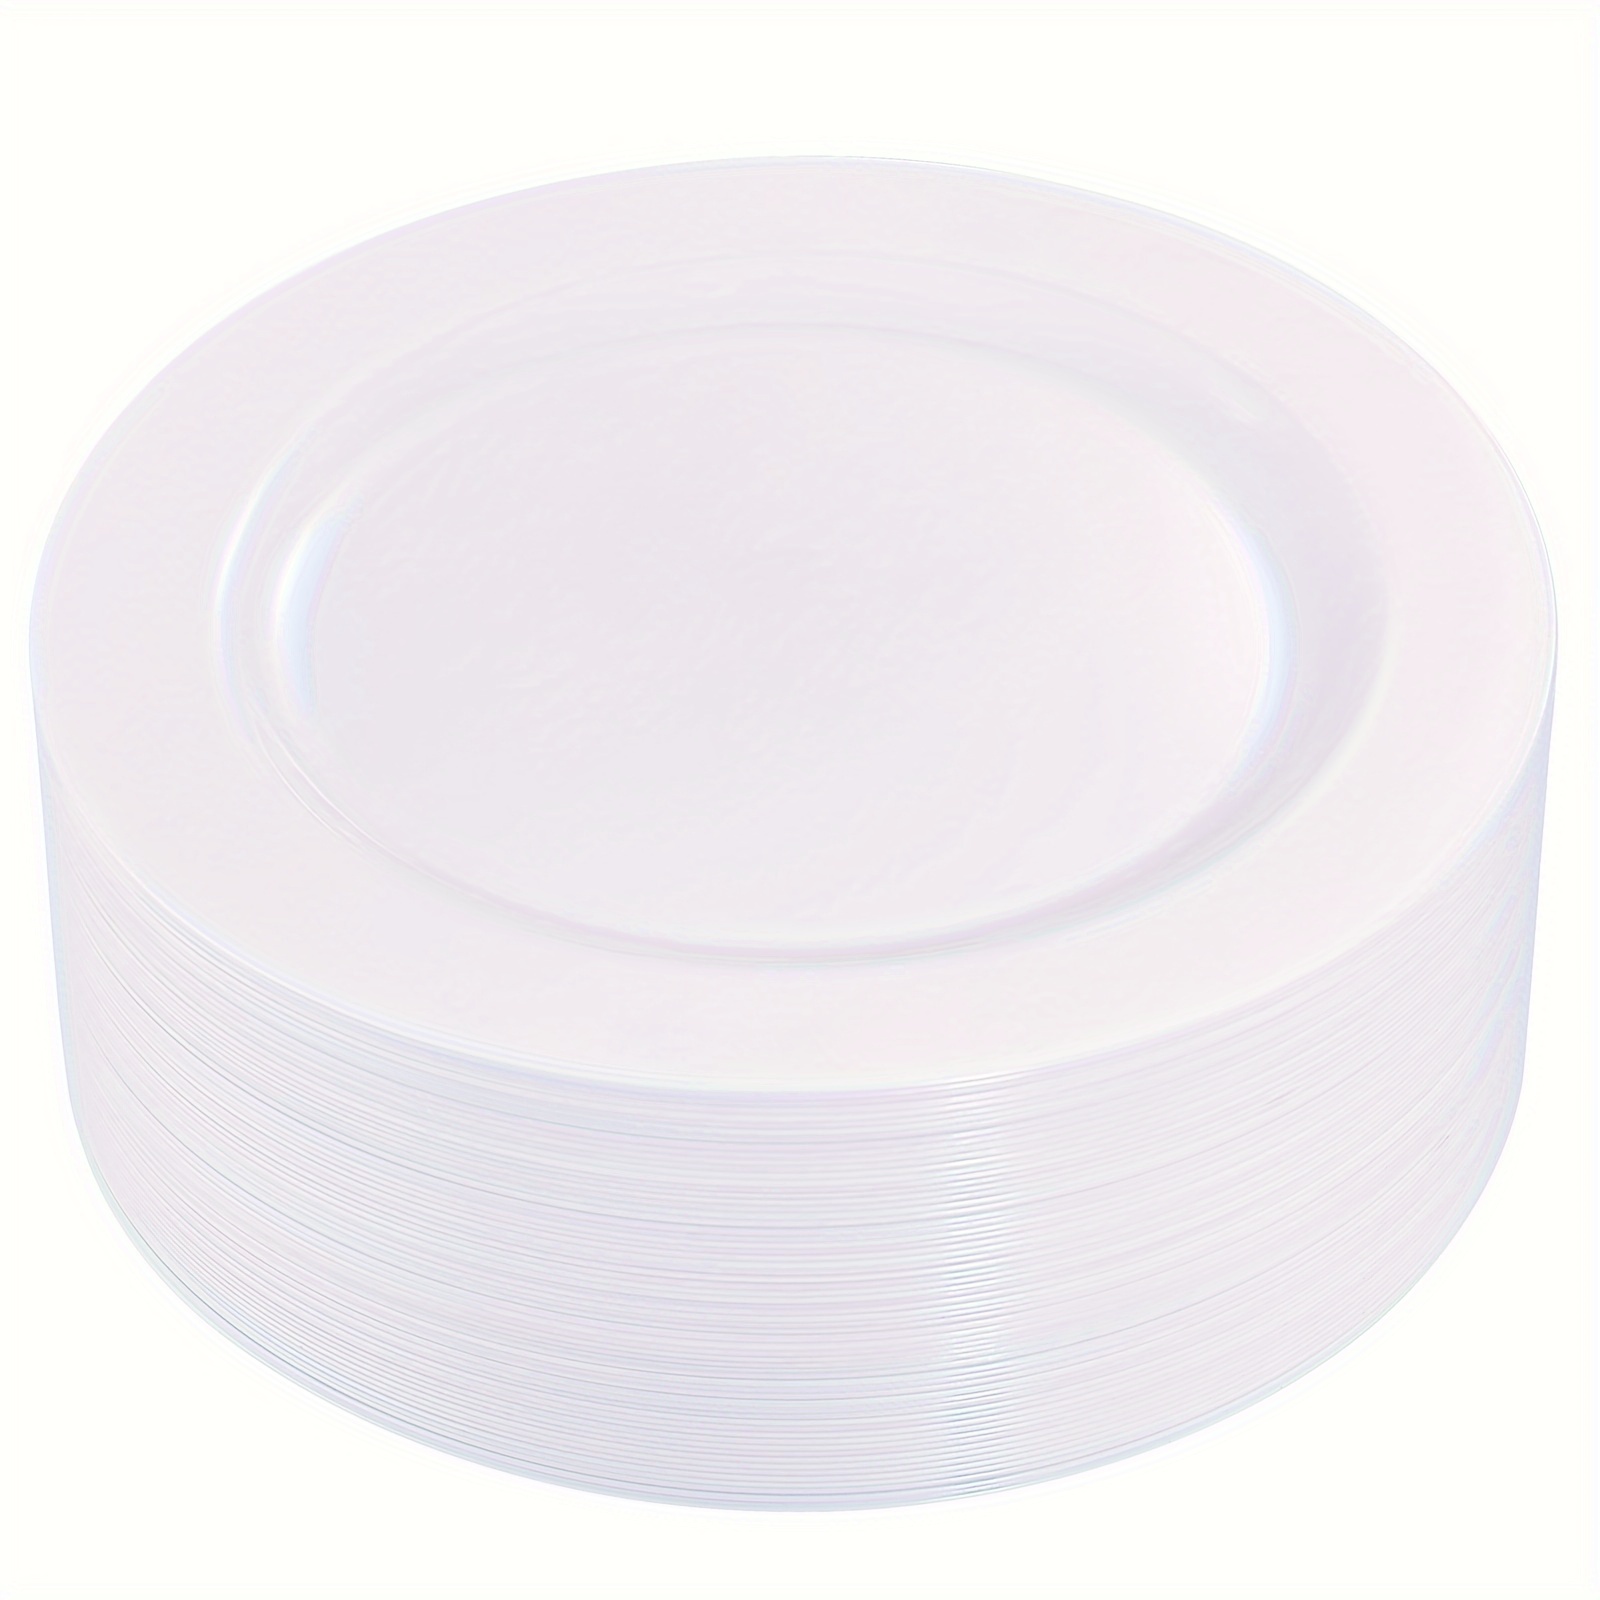 

50pcs White Plastic Dinner Plates 10.25 Inch, Premium Disposable Plates, Safe And Reusable, Great For Party